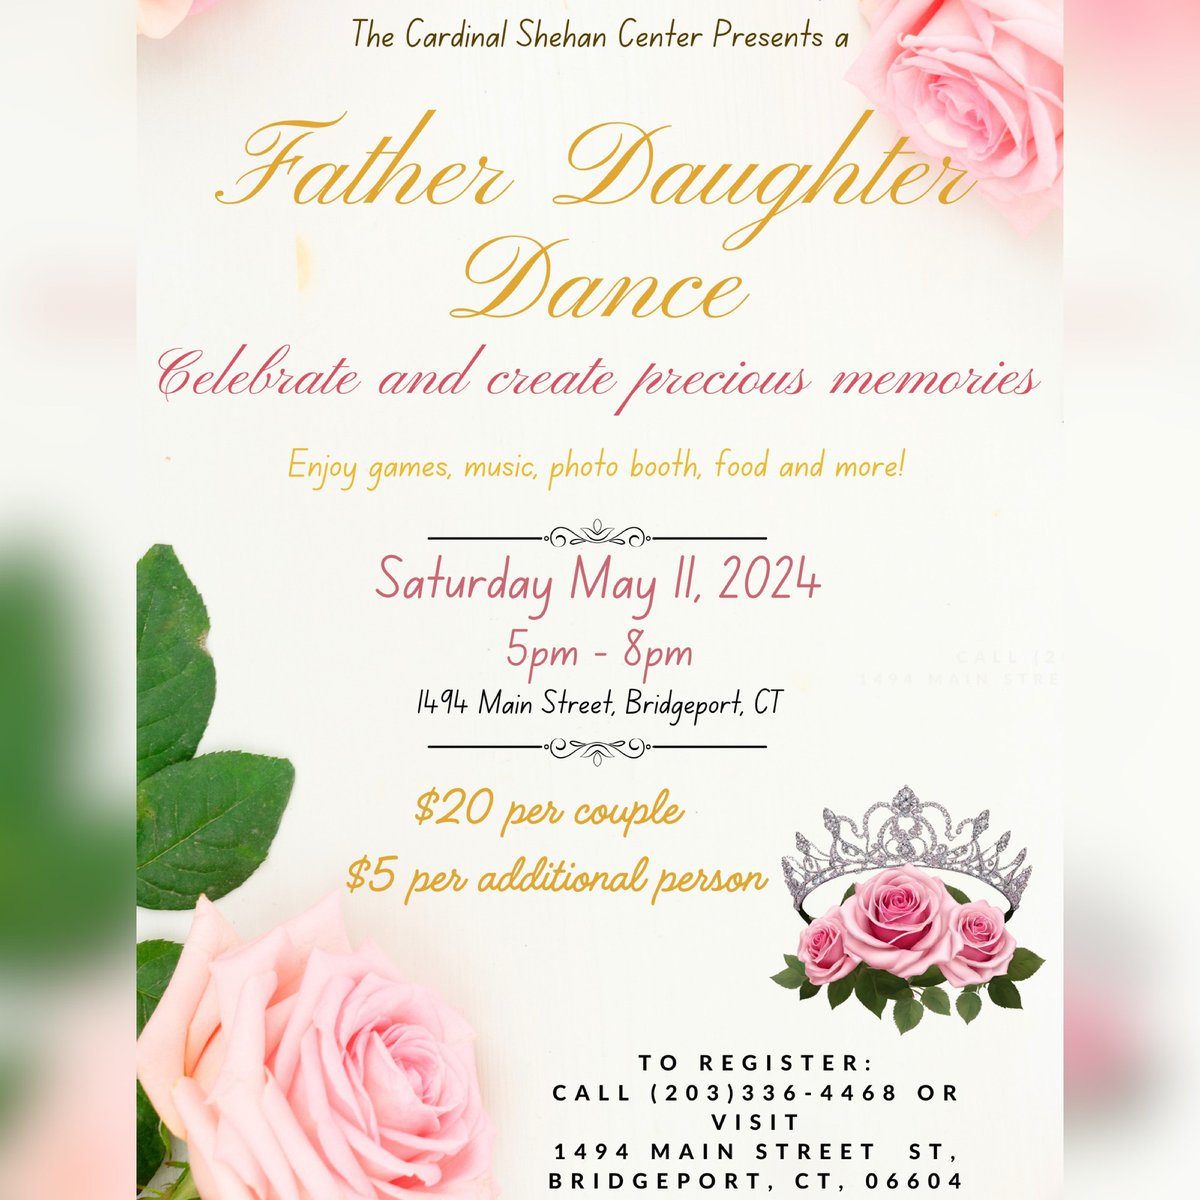 The Cardinal Shehan Center is hosting their annual Father Daughter Dance on Saturday, May 11, from 5:00 - 8:00 PM! The cost is $20 per couple and $5 for each additional guest. For more information or to register, call (203) 336-4468.